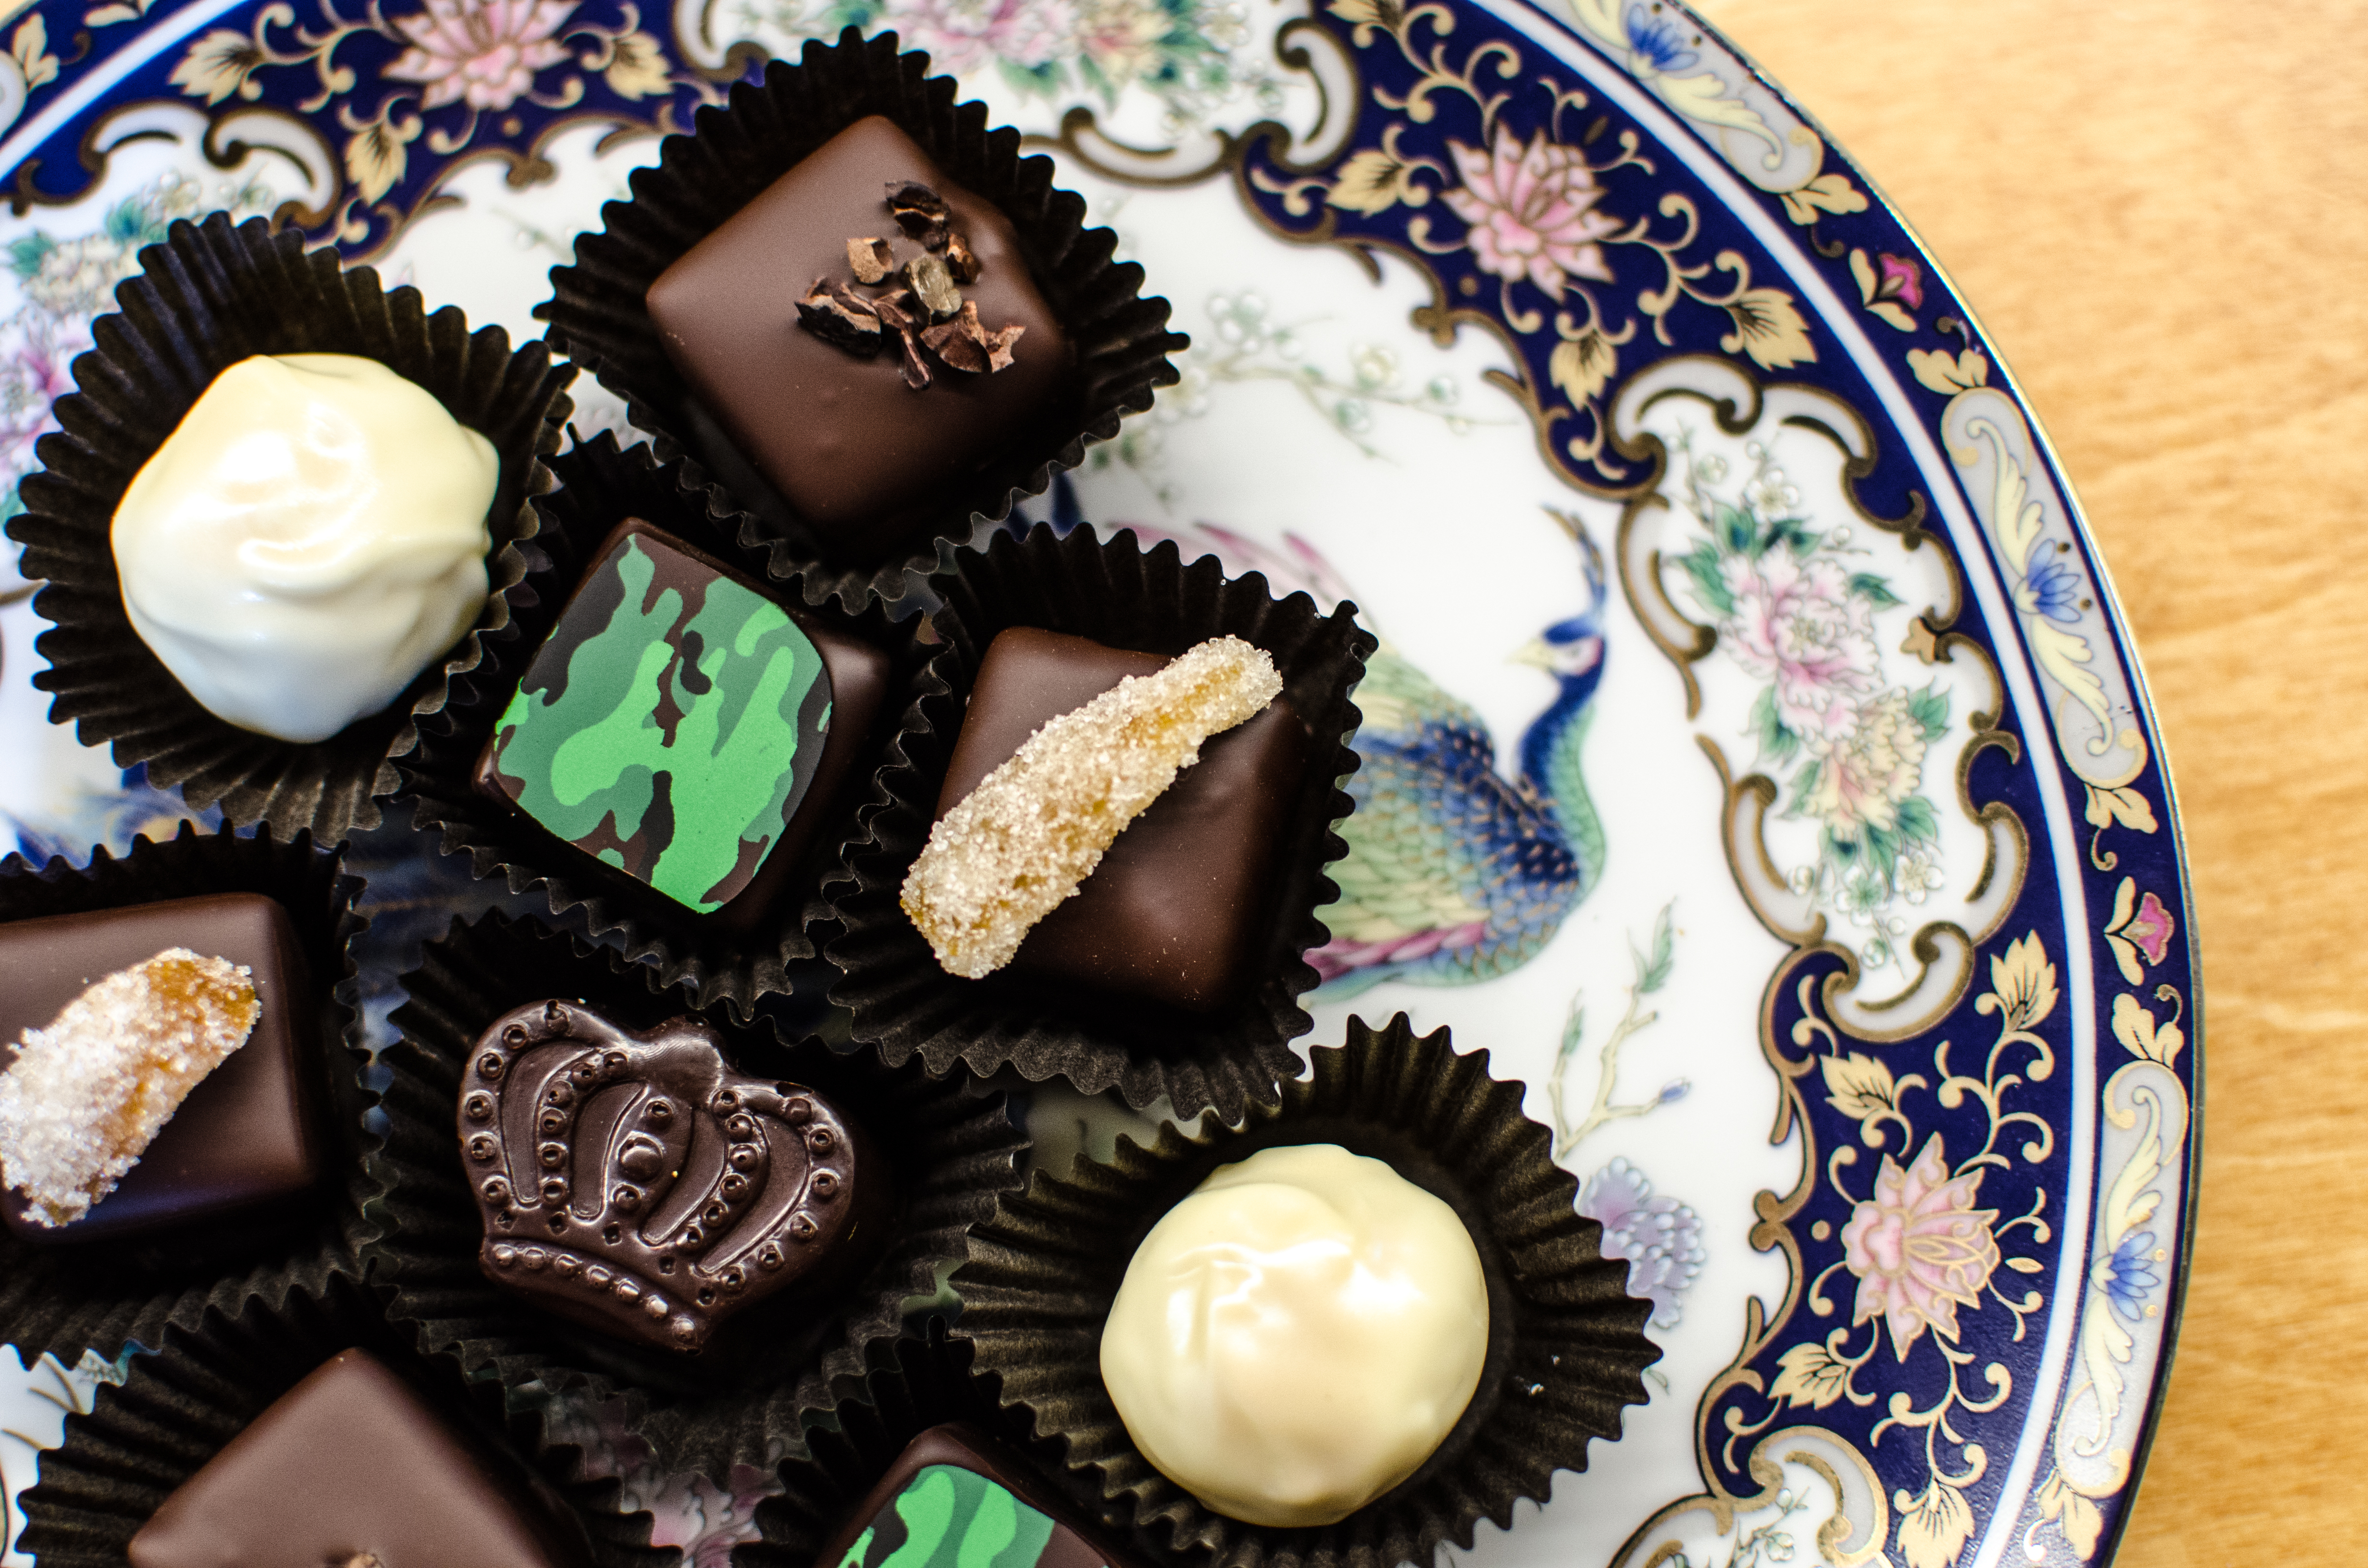 Several fancy chocolates sit on an elaborate peacock plate. One chocolate is crown-shaped, several are garnished with candied ginger, and several are garnished with a camo-patterned sliver of chocolate.